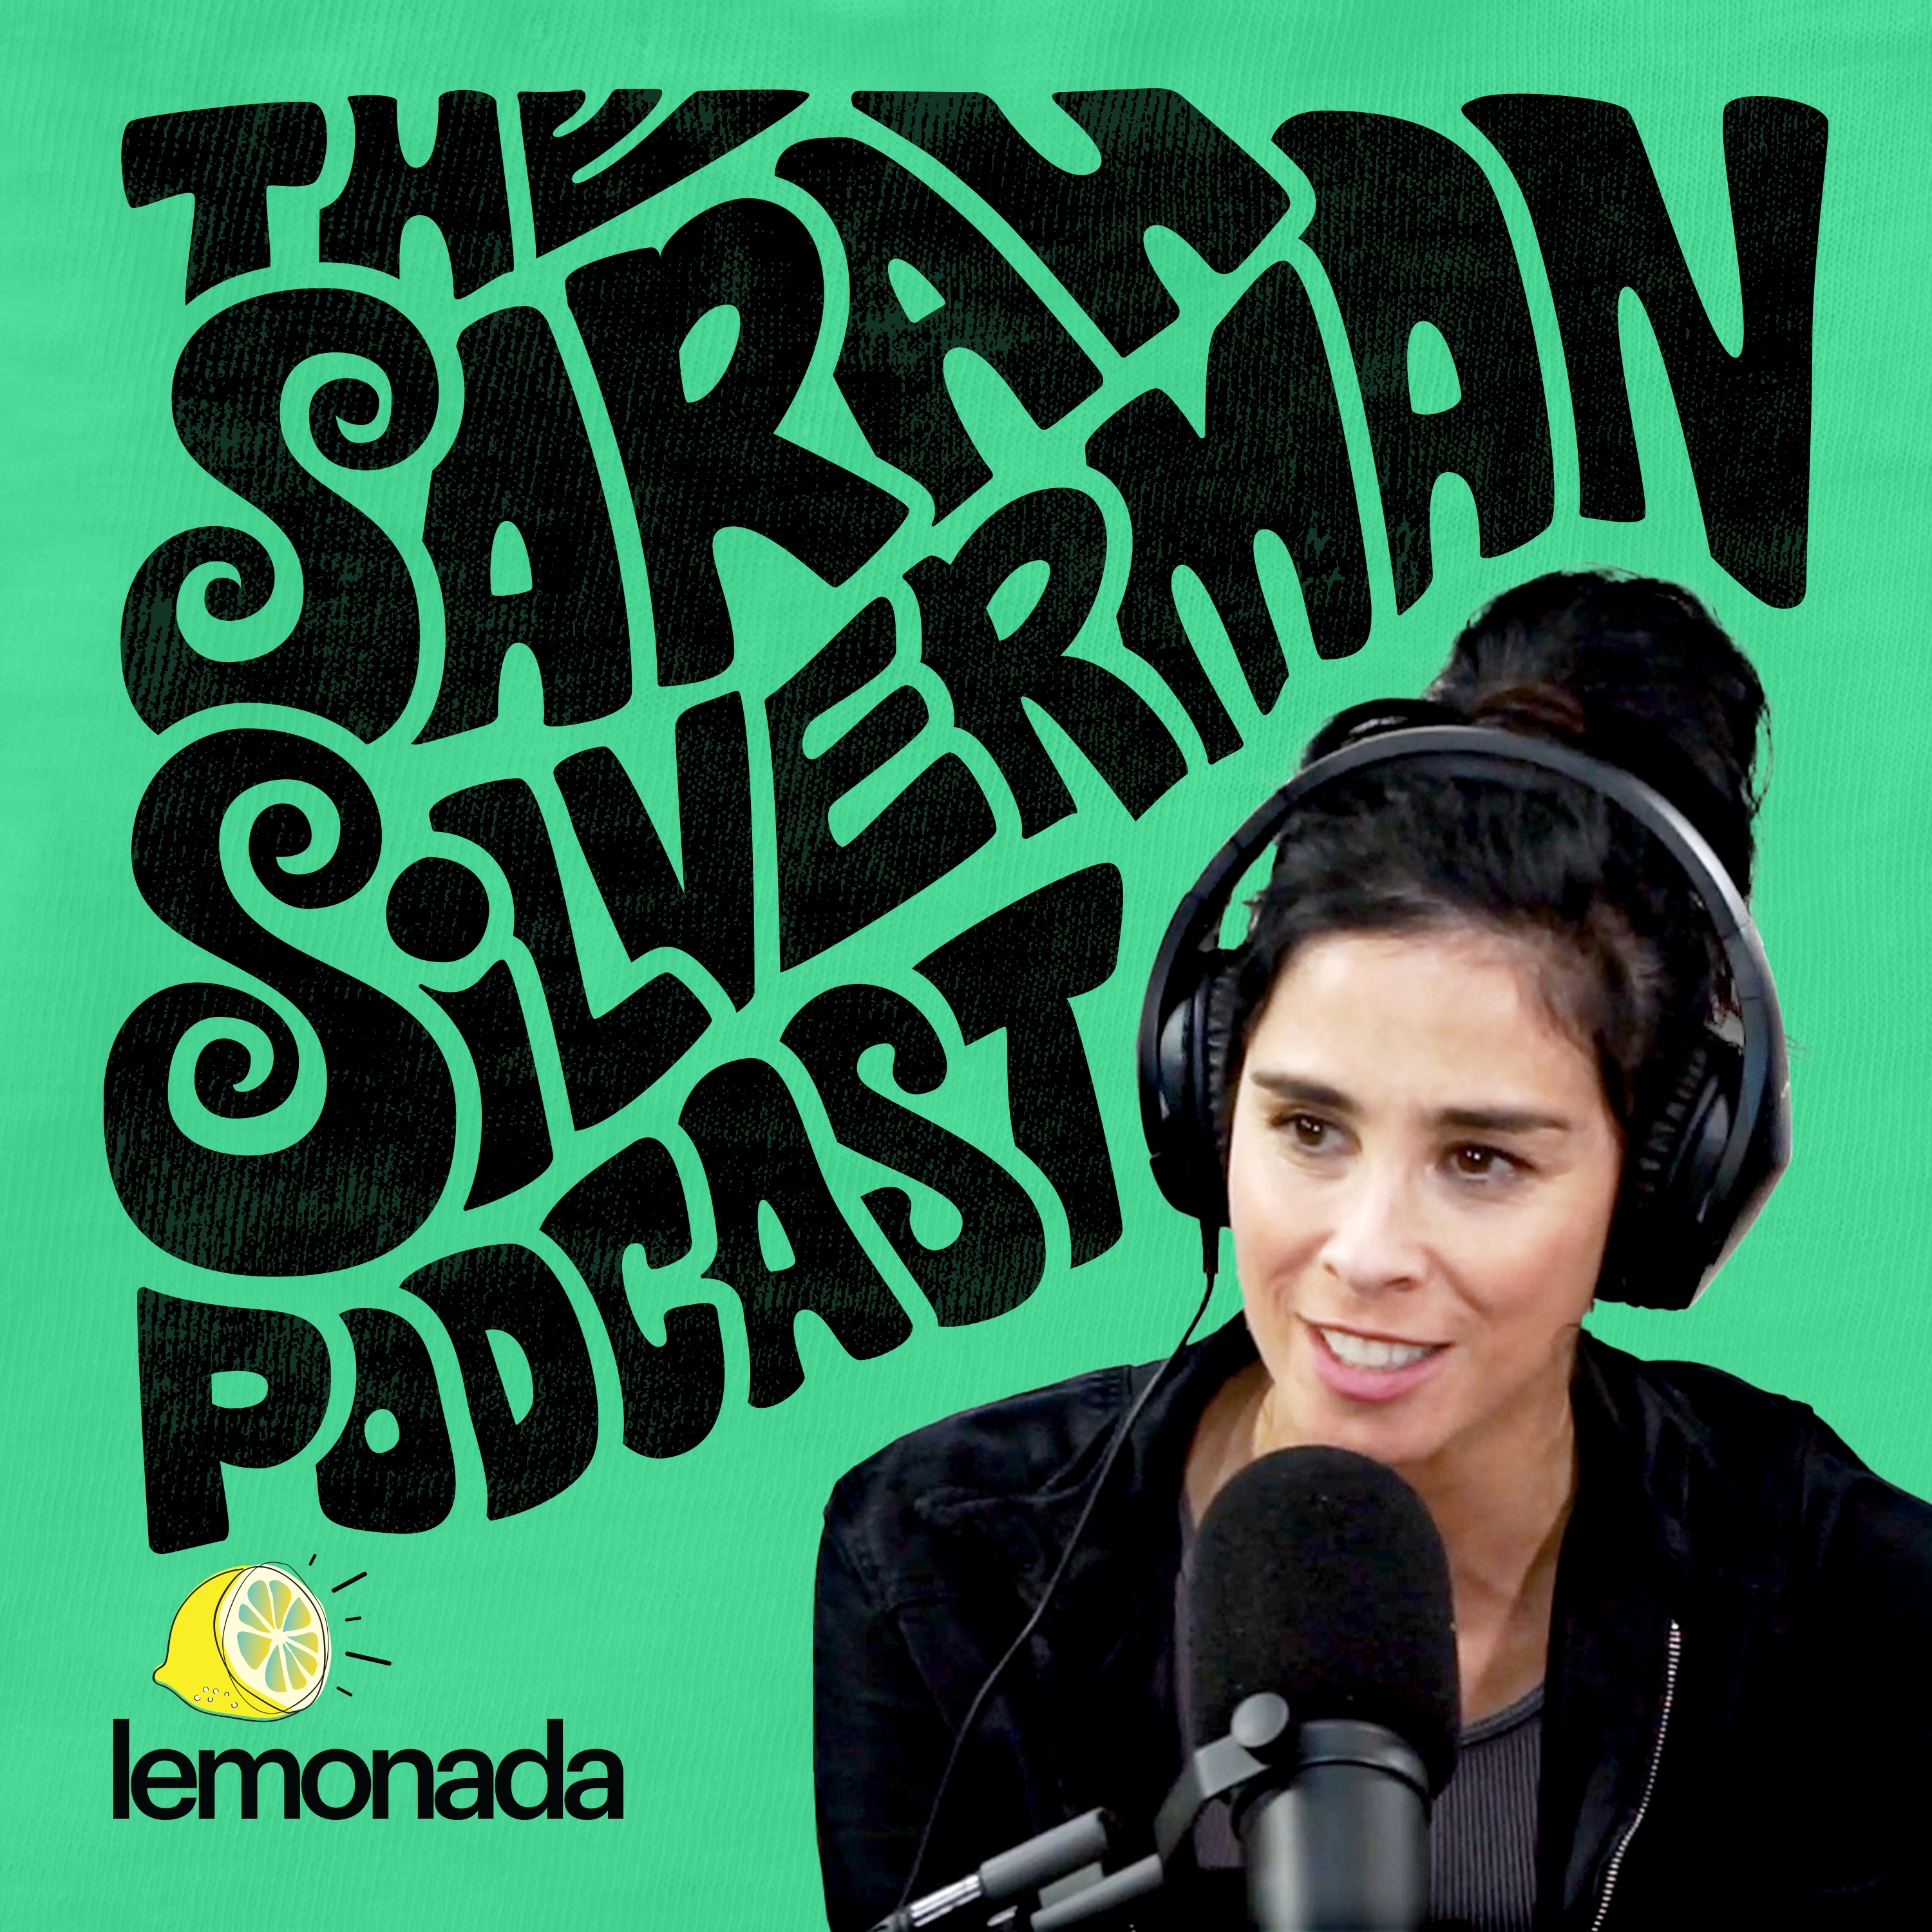 The Sarah Silverman Podcast podcast show image